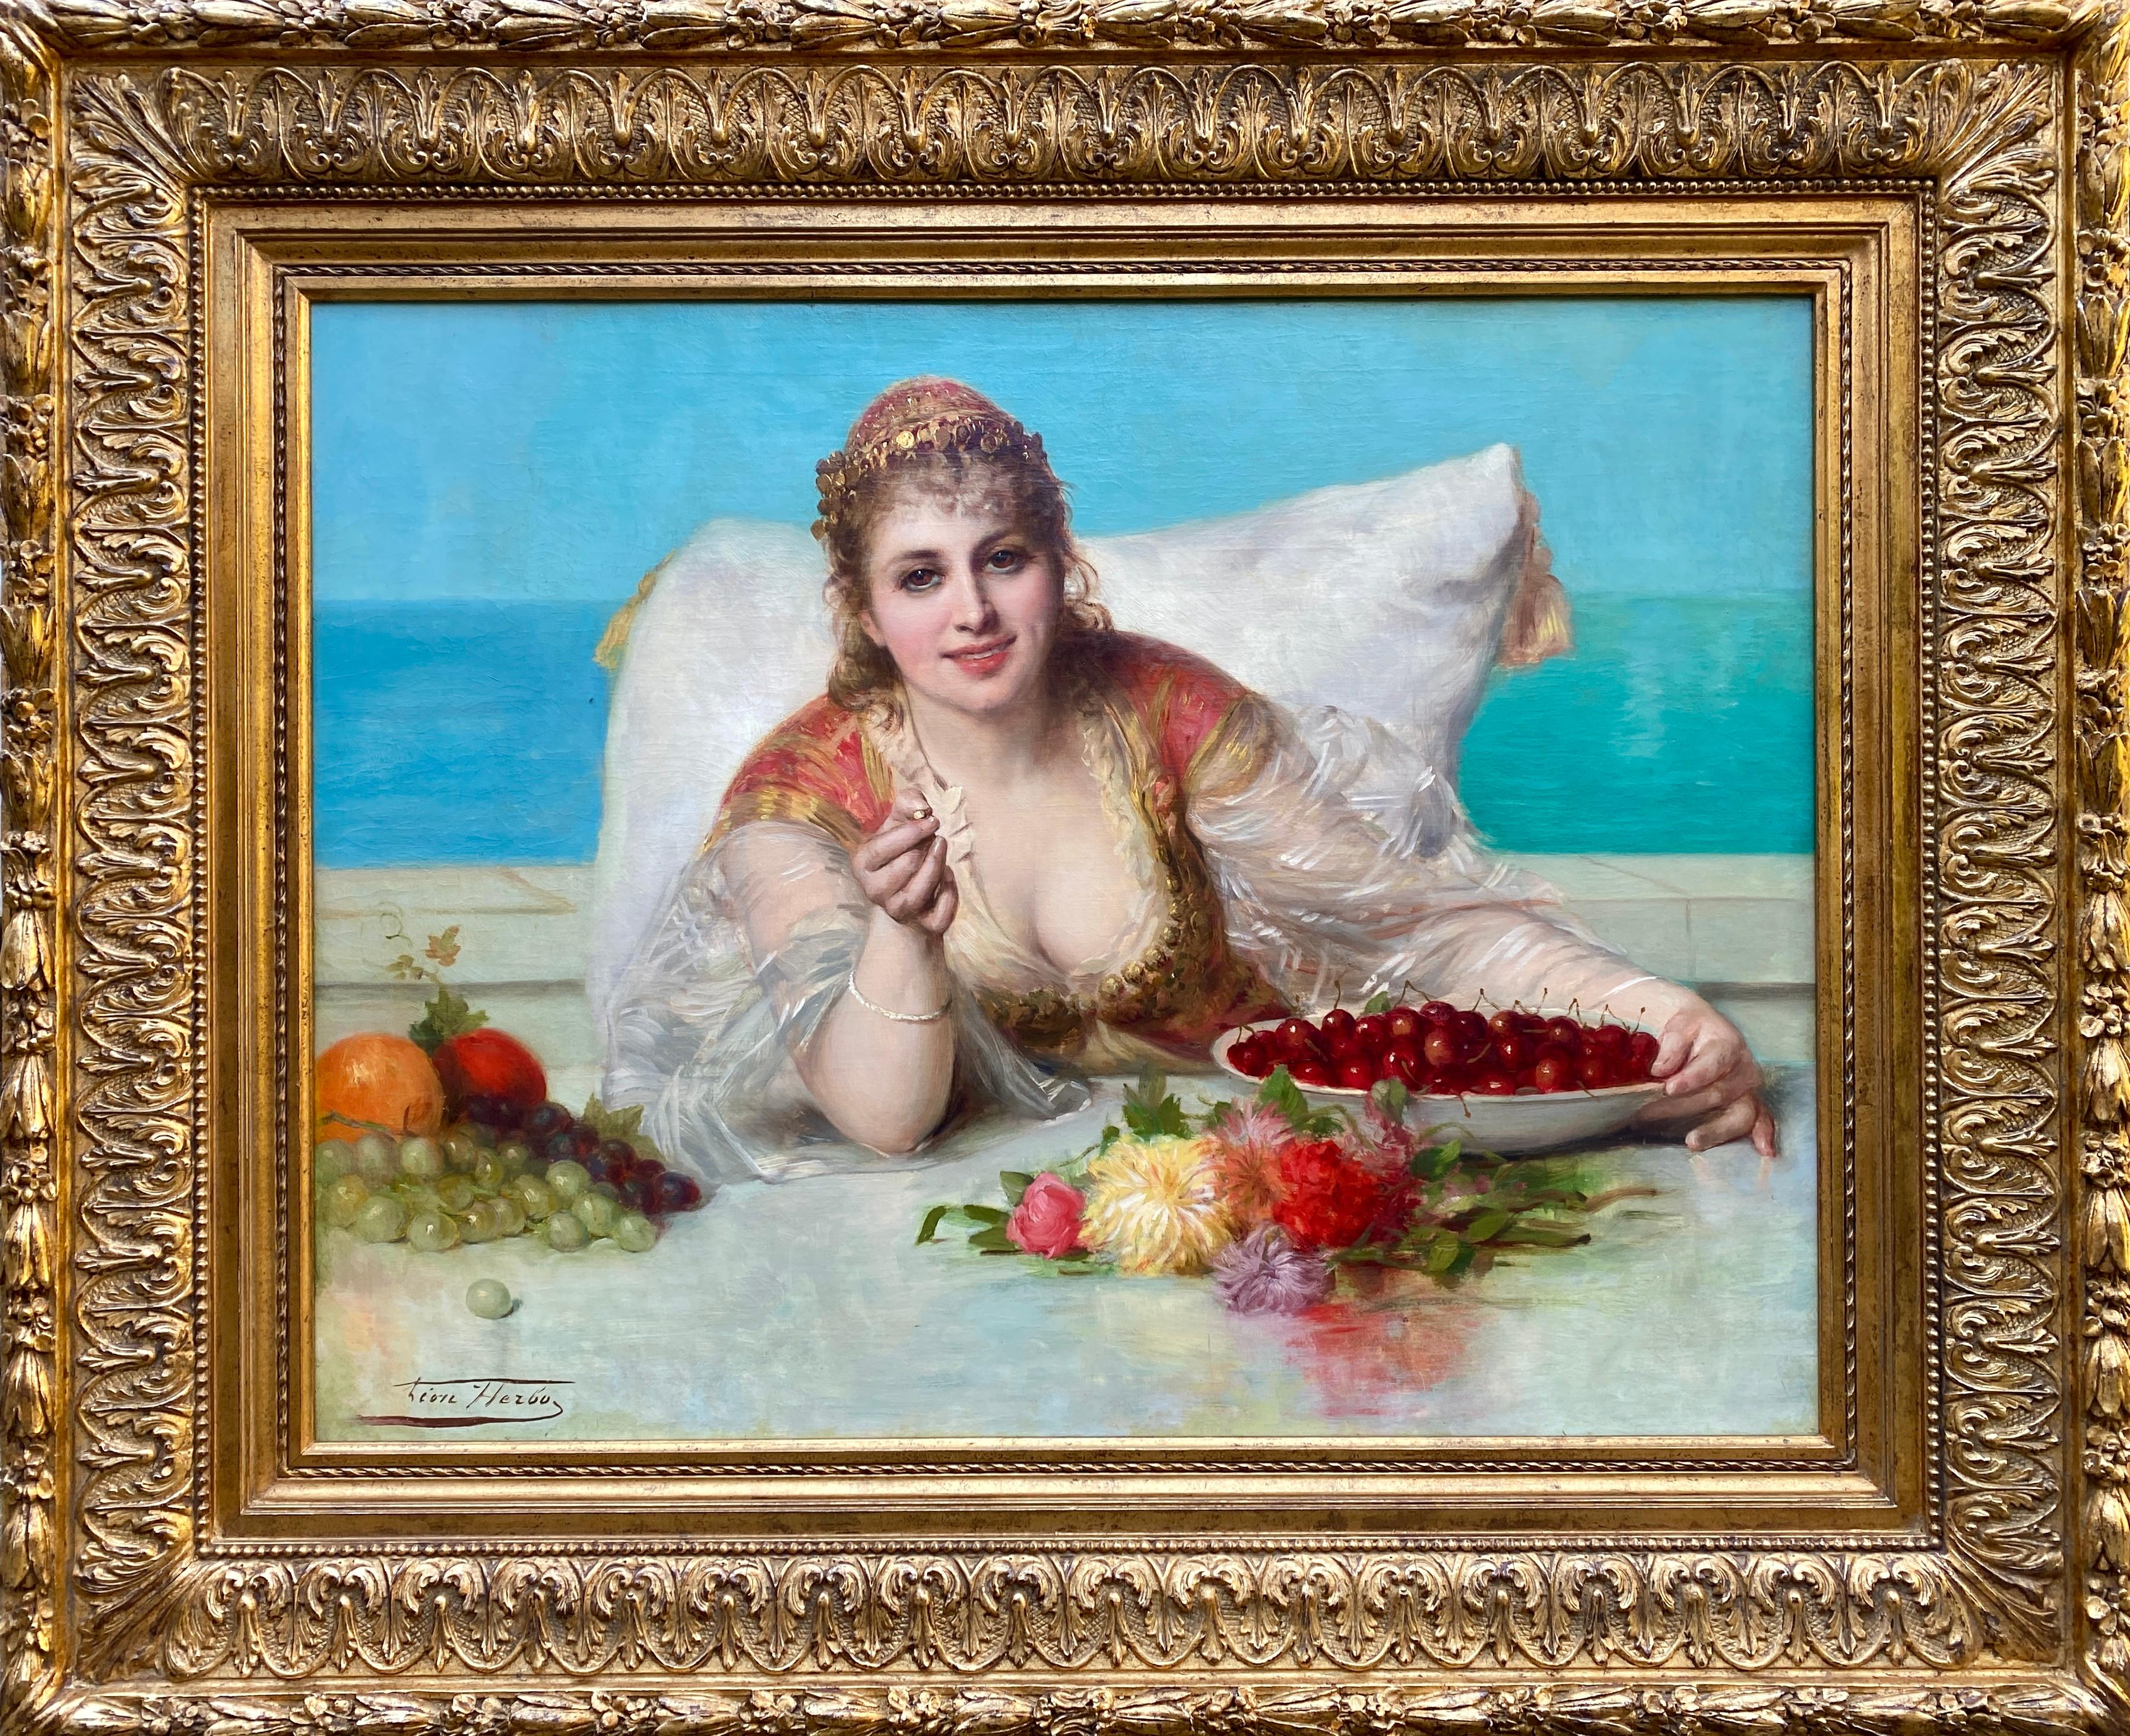 Leon Herbo Portrait Painting - Léon Herbo, 1850 – 1907, Belgian, 'Oriental Woman with Fruits and Flowers'